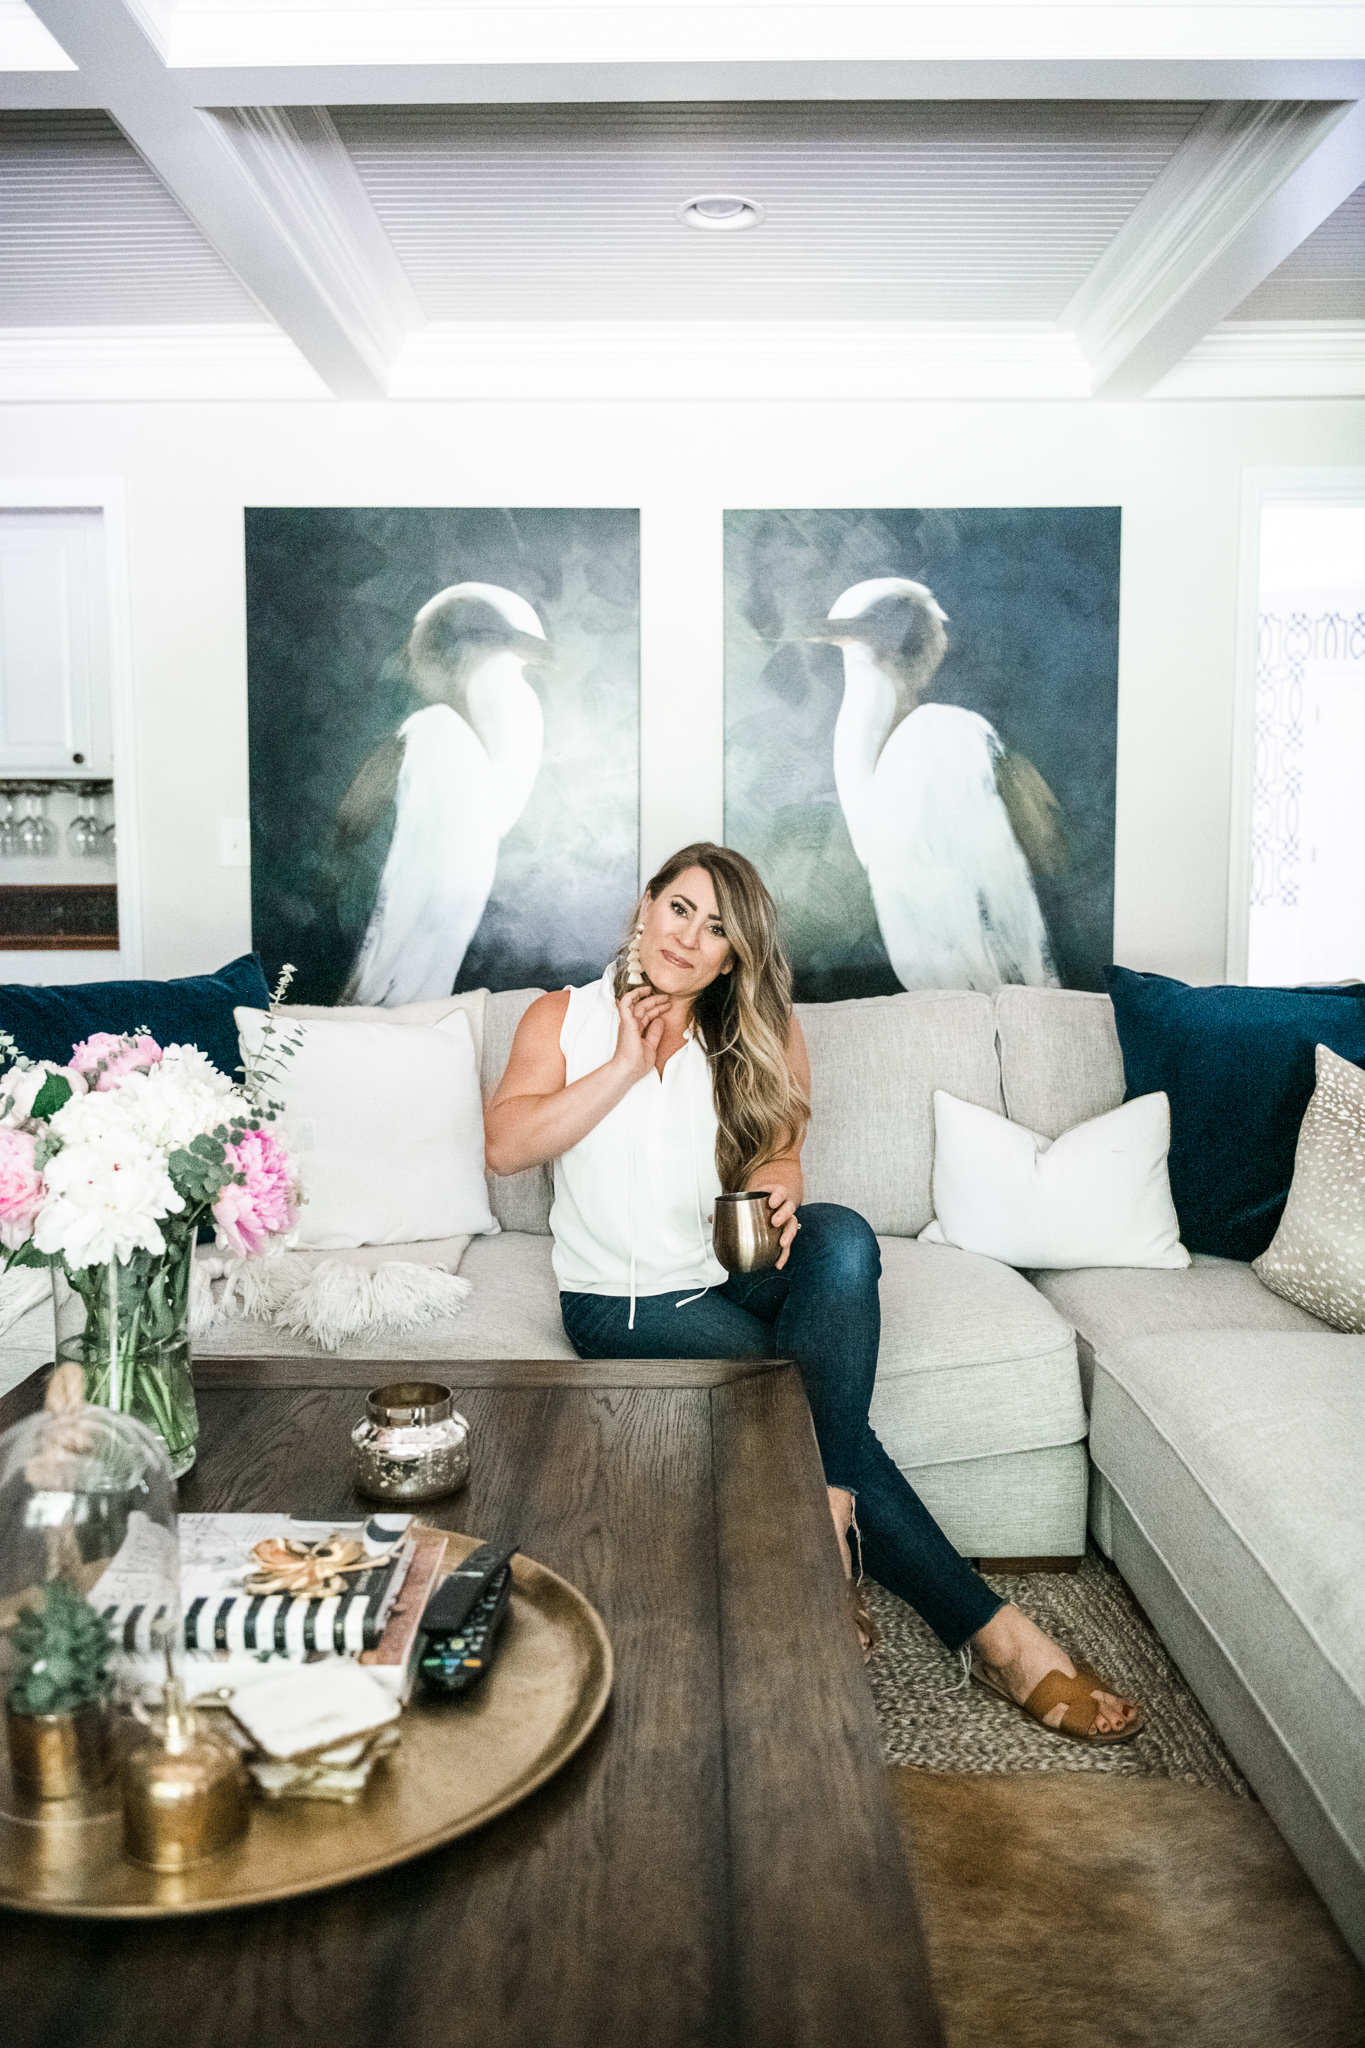 Grandin Road Wall Art by popular Ohio life and style blog, Coffee Beans and Bobby Pins: image of a woman sitting on a grey sectional couch in her living room in front of a pair of Grandin Road White Heron Wall Art.